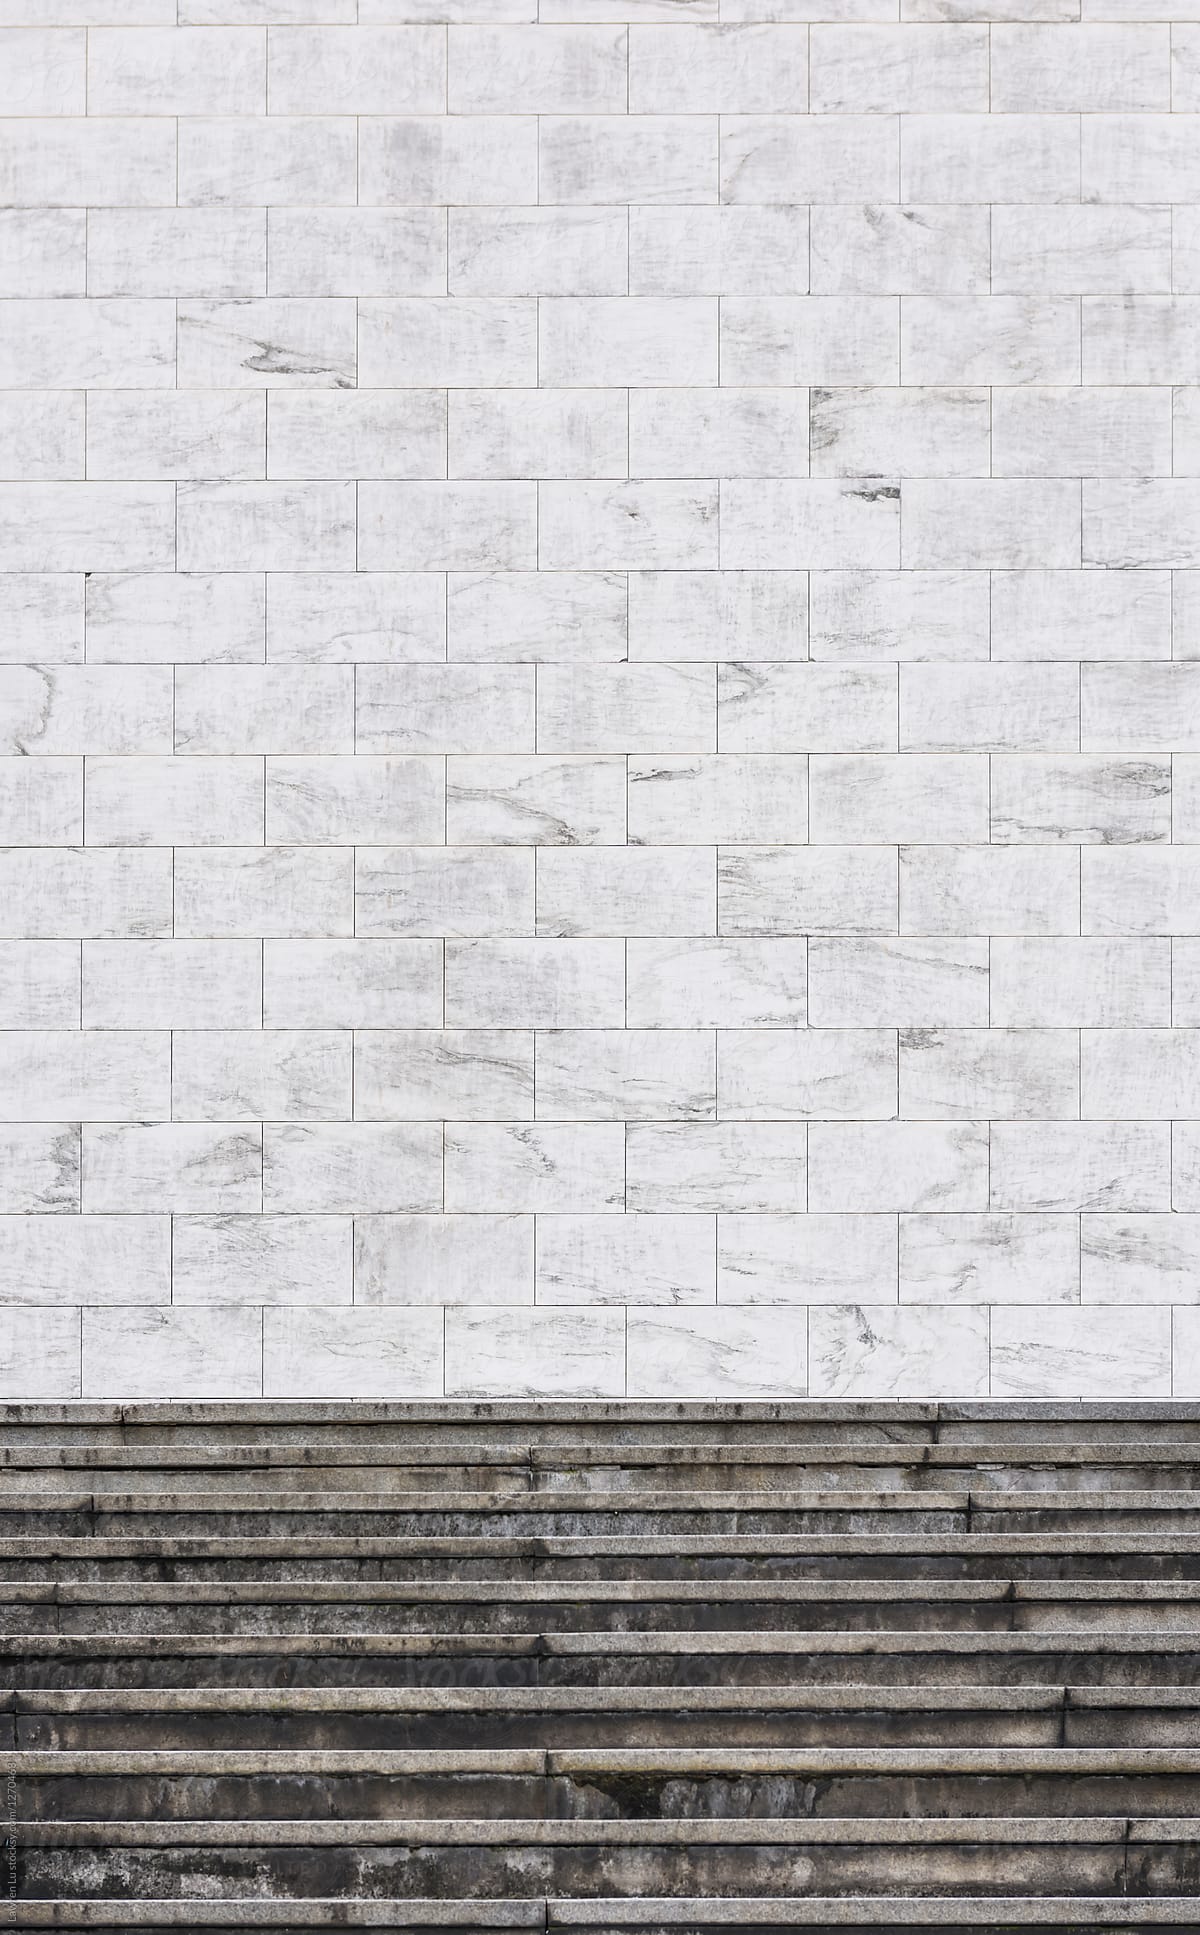 White Stone Texture Wall Background With Steps By Lawren Lu Wall Brick Stocksy United